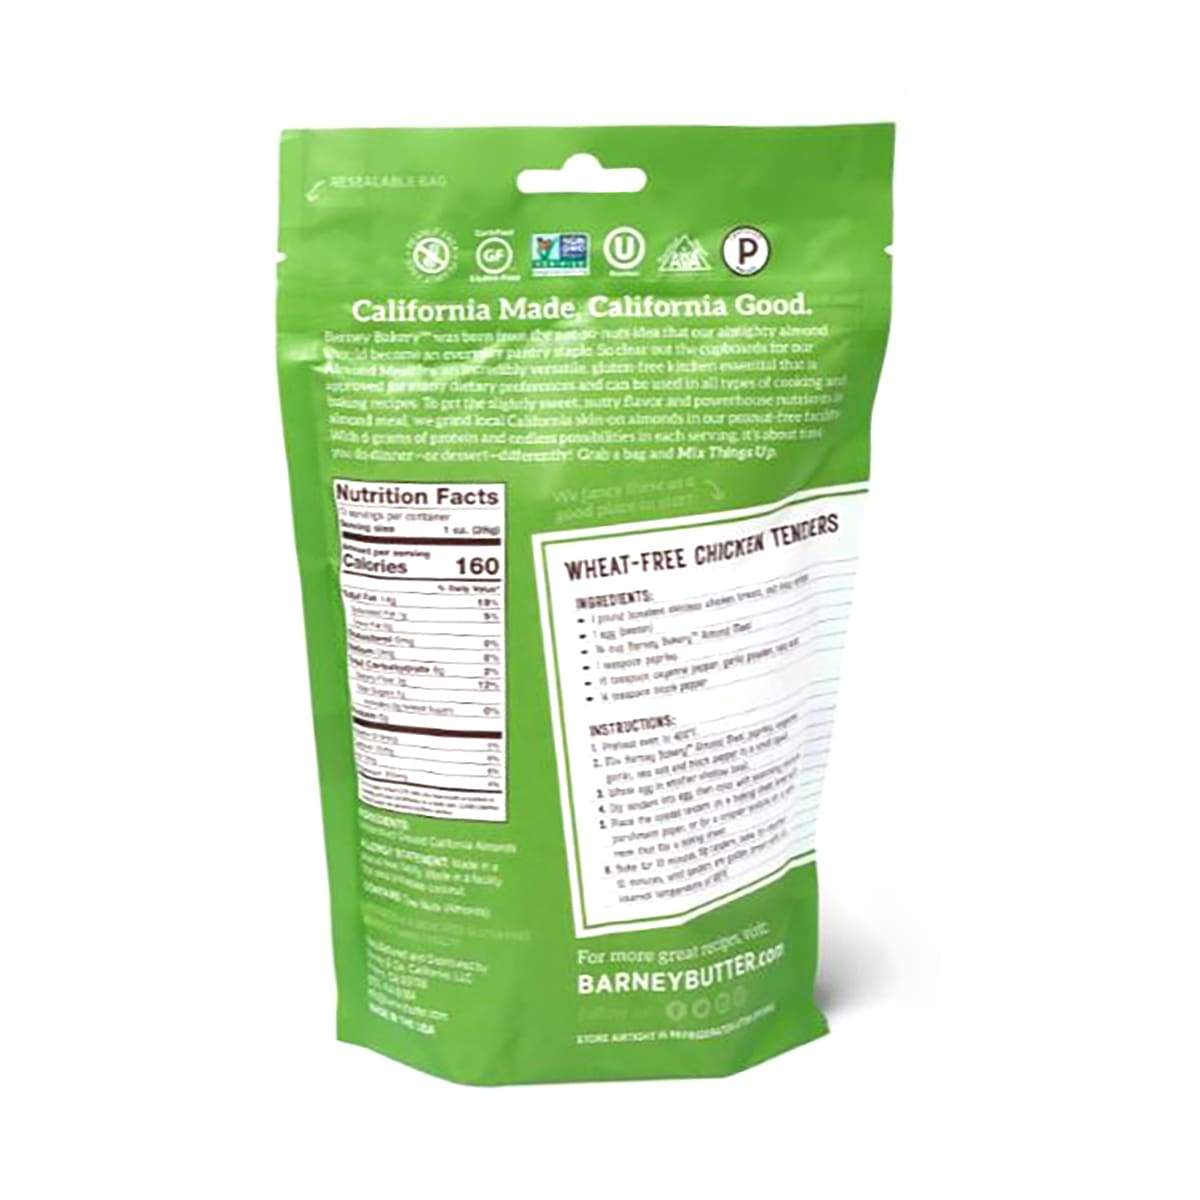 13oz Gluten Free Natural Almond Meal